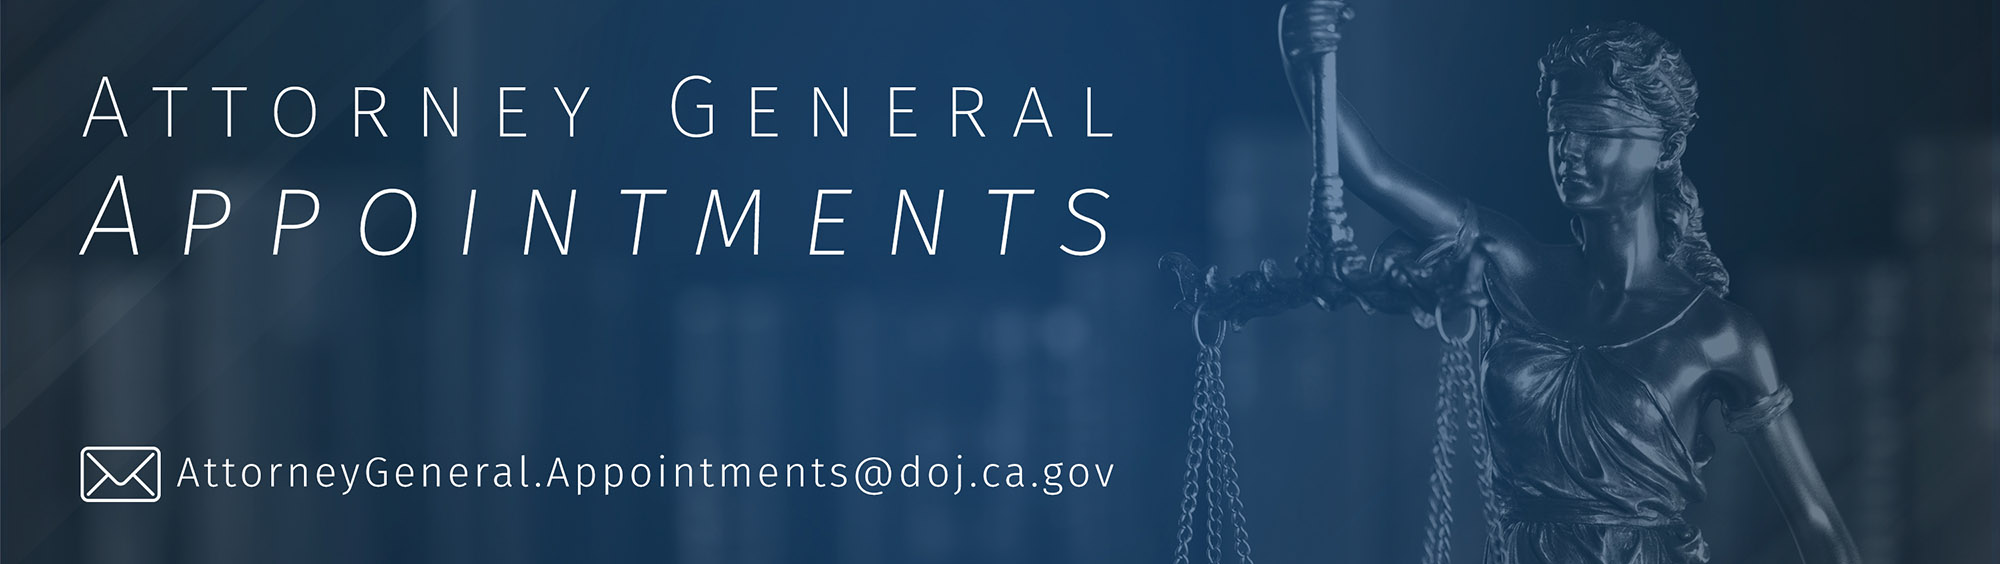 AG Appointments Banner Image